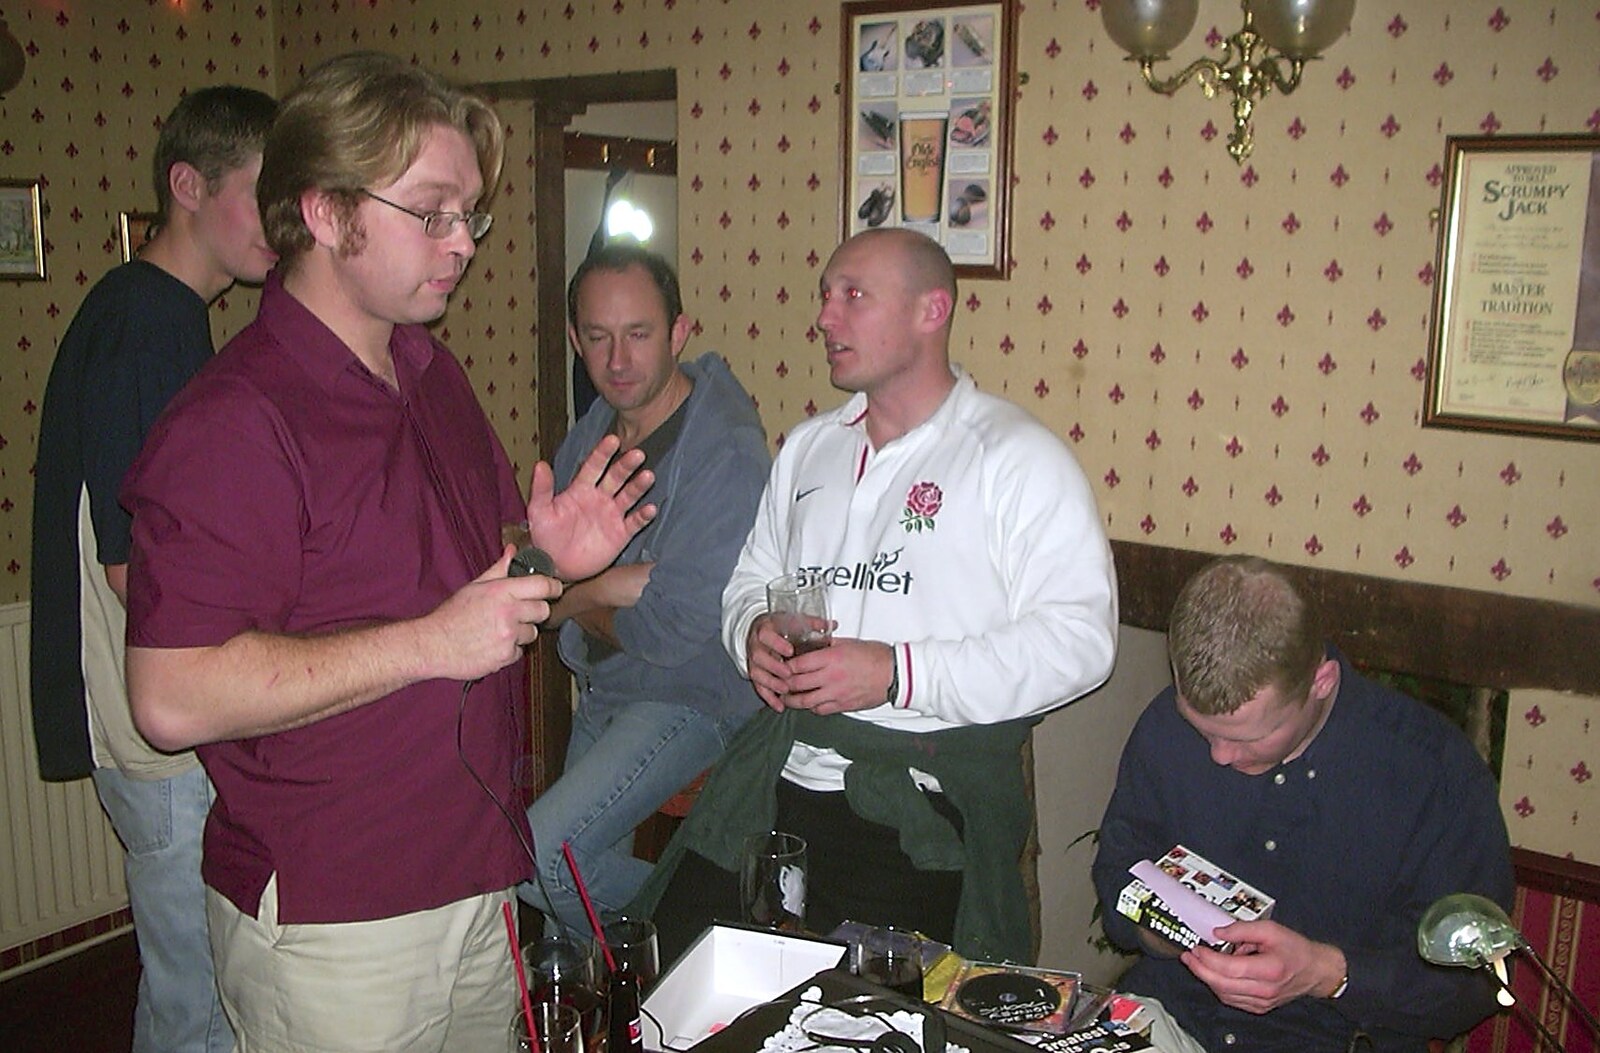 Mikey-P tries out the DJ hotseat from Twenty Years at The Swan Inn, Brome, Suffolk - 15th November 2003